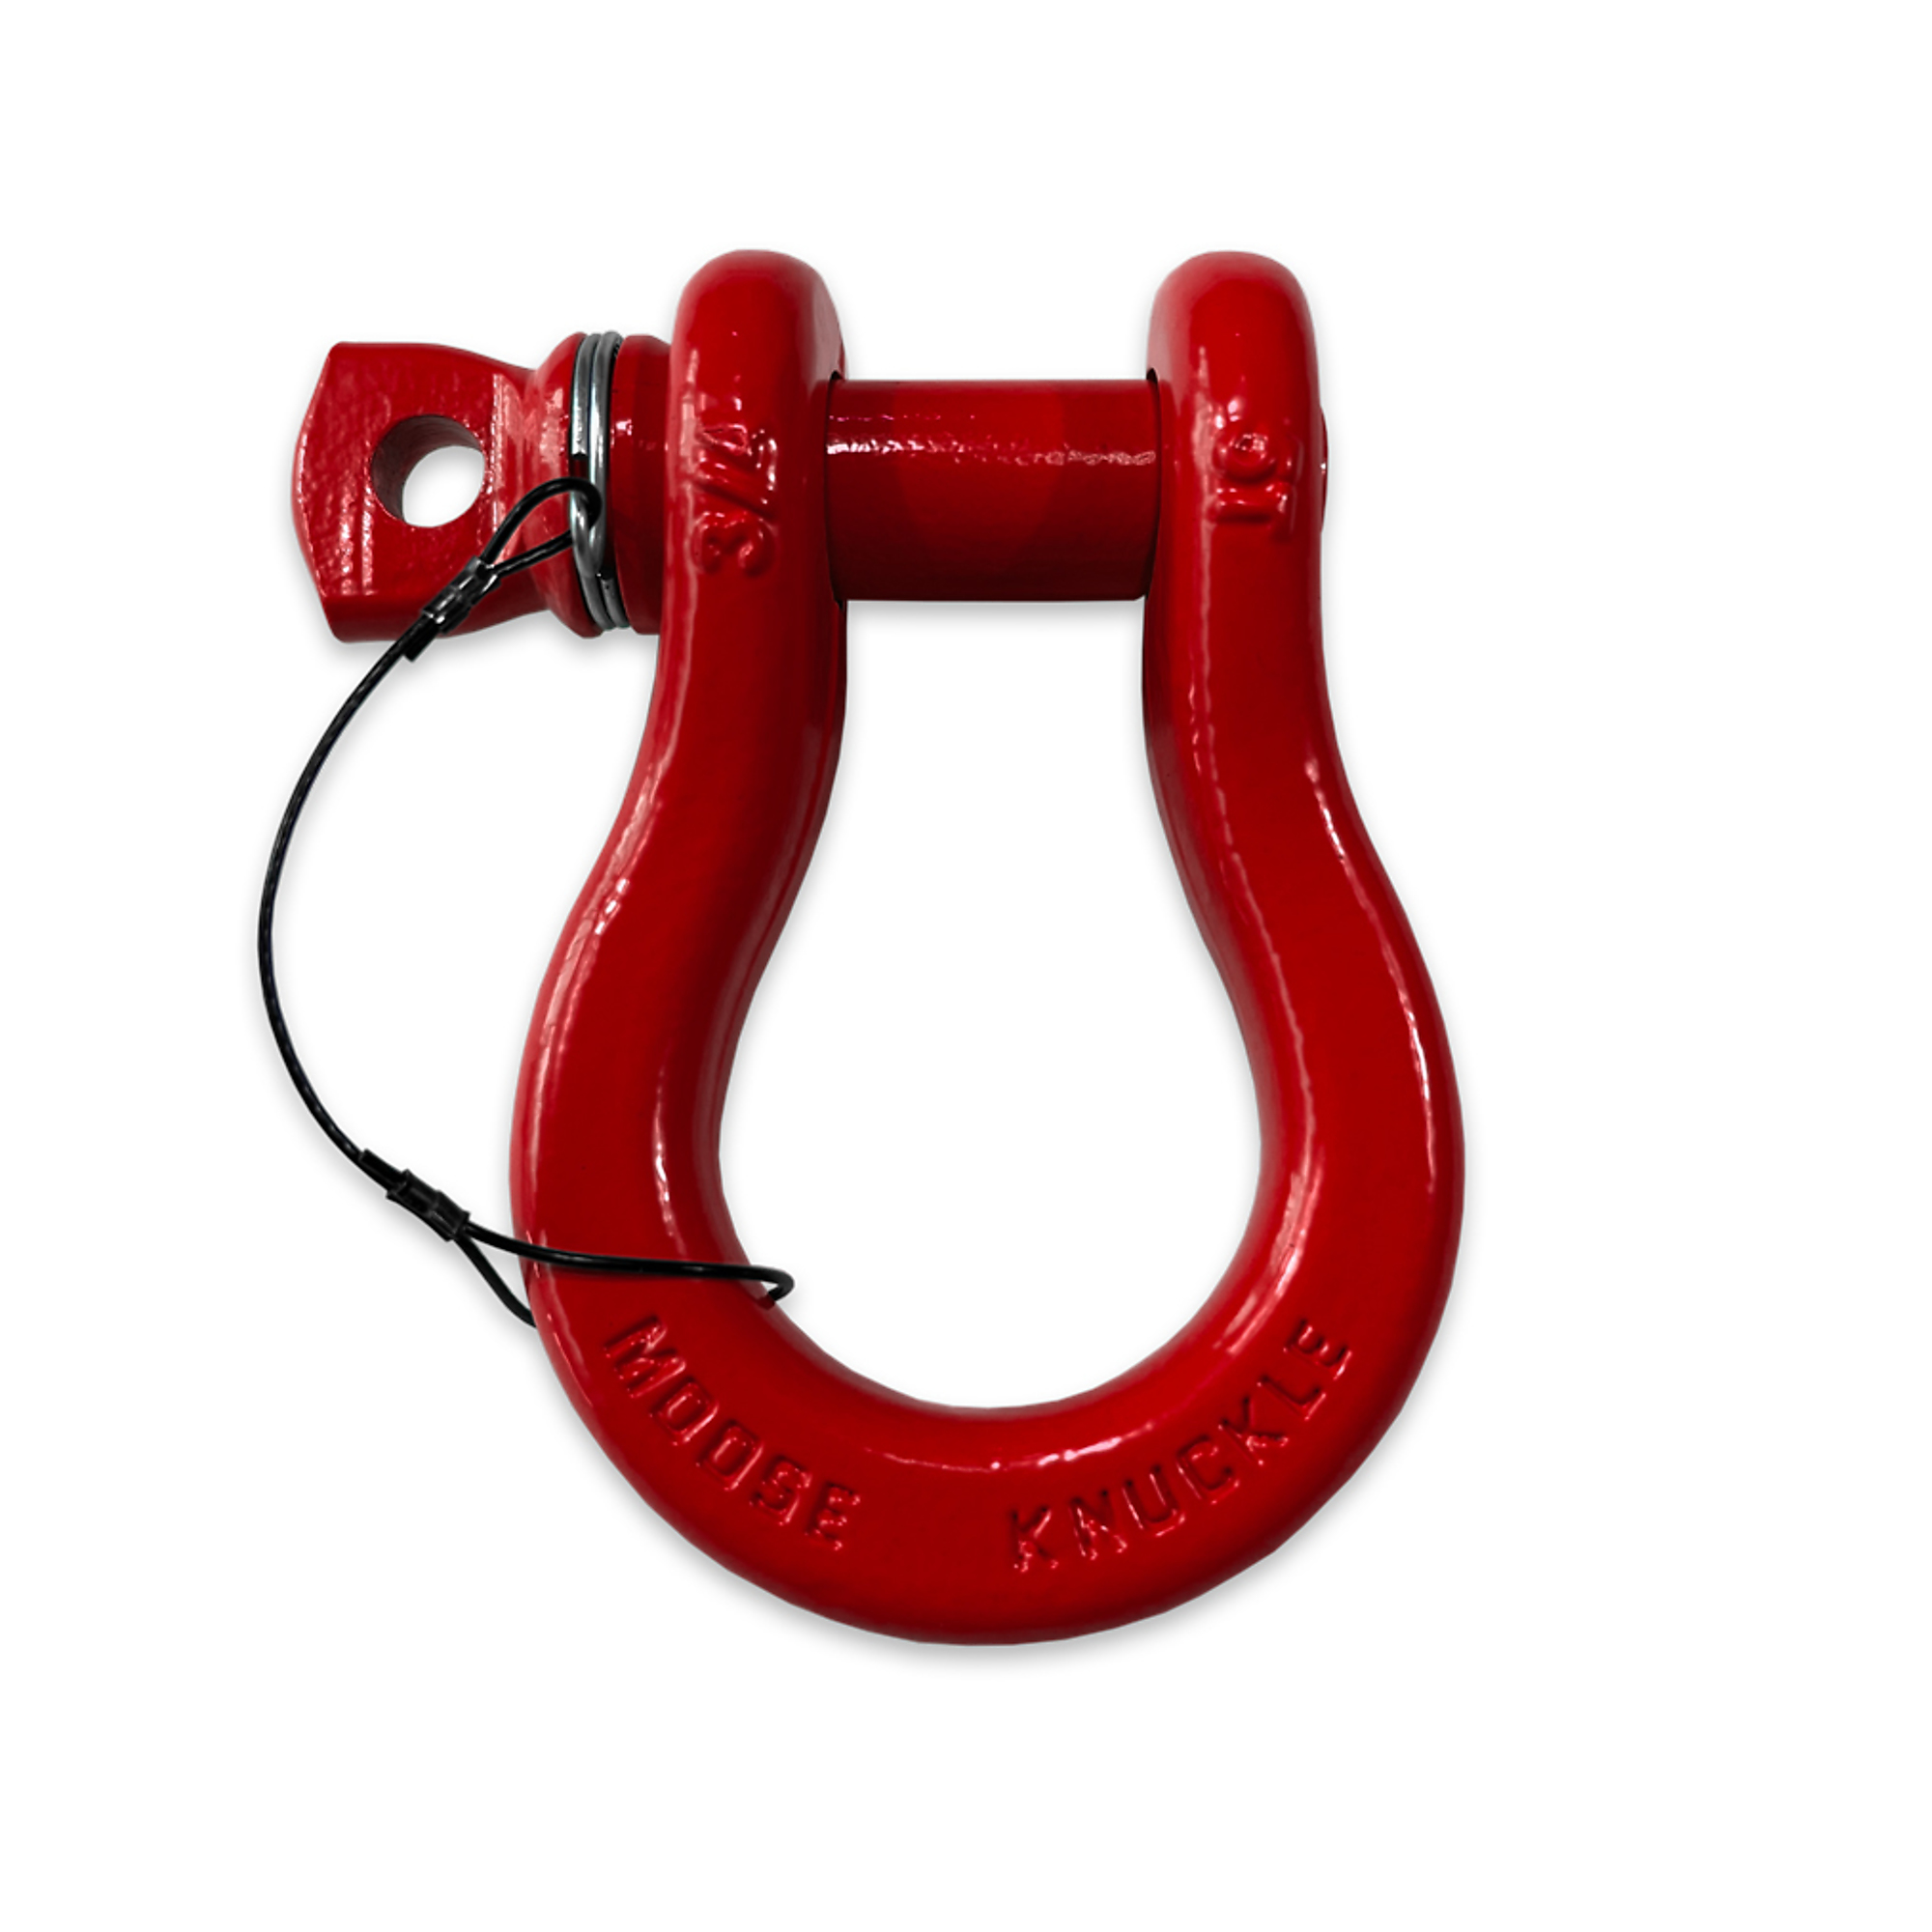 Moose Knuckle Offroad, Flame Red Recovery Towing Lanyard Spin Pin 3/4 Shackle, Working Load Limit 10000 lb, Model FN000023-009